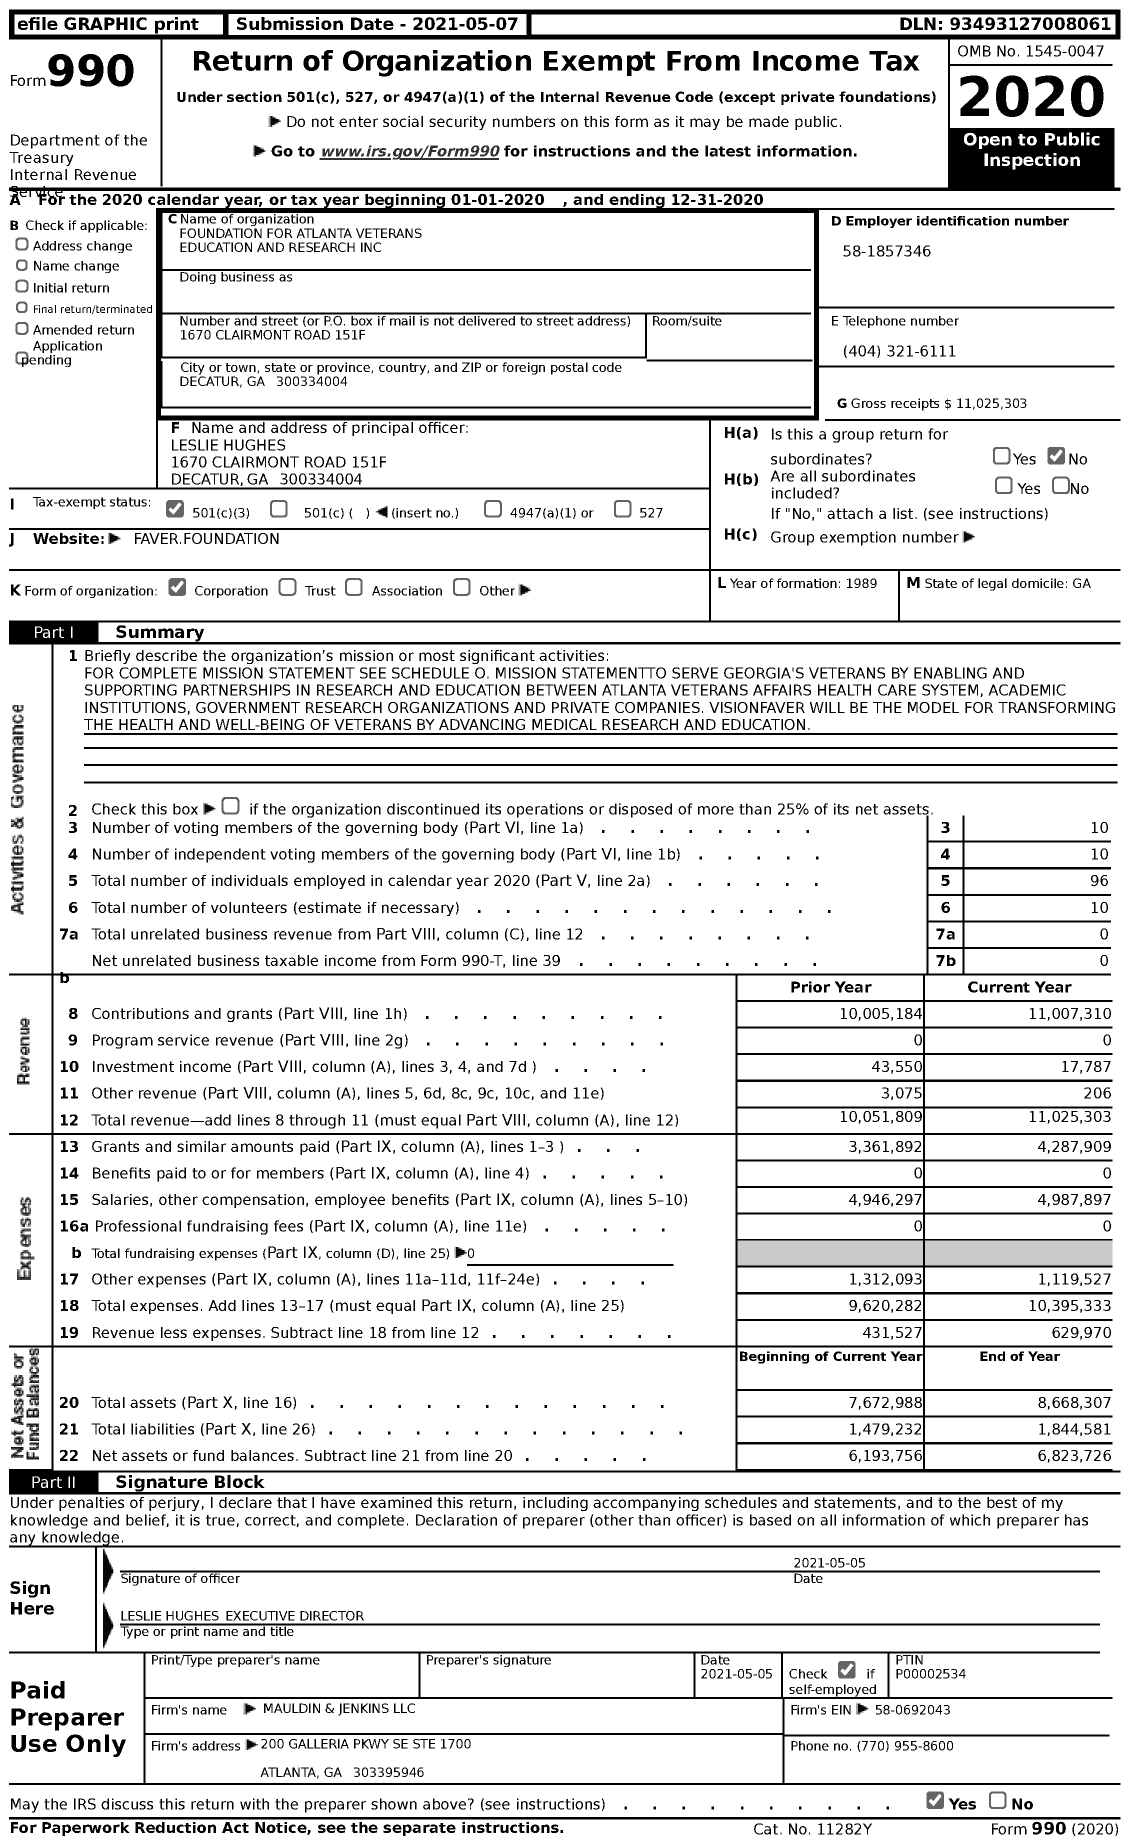 Image of first page of 2020 Form 990 for Foundation for Atlanta Veterans Education and Research (AREF)